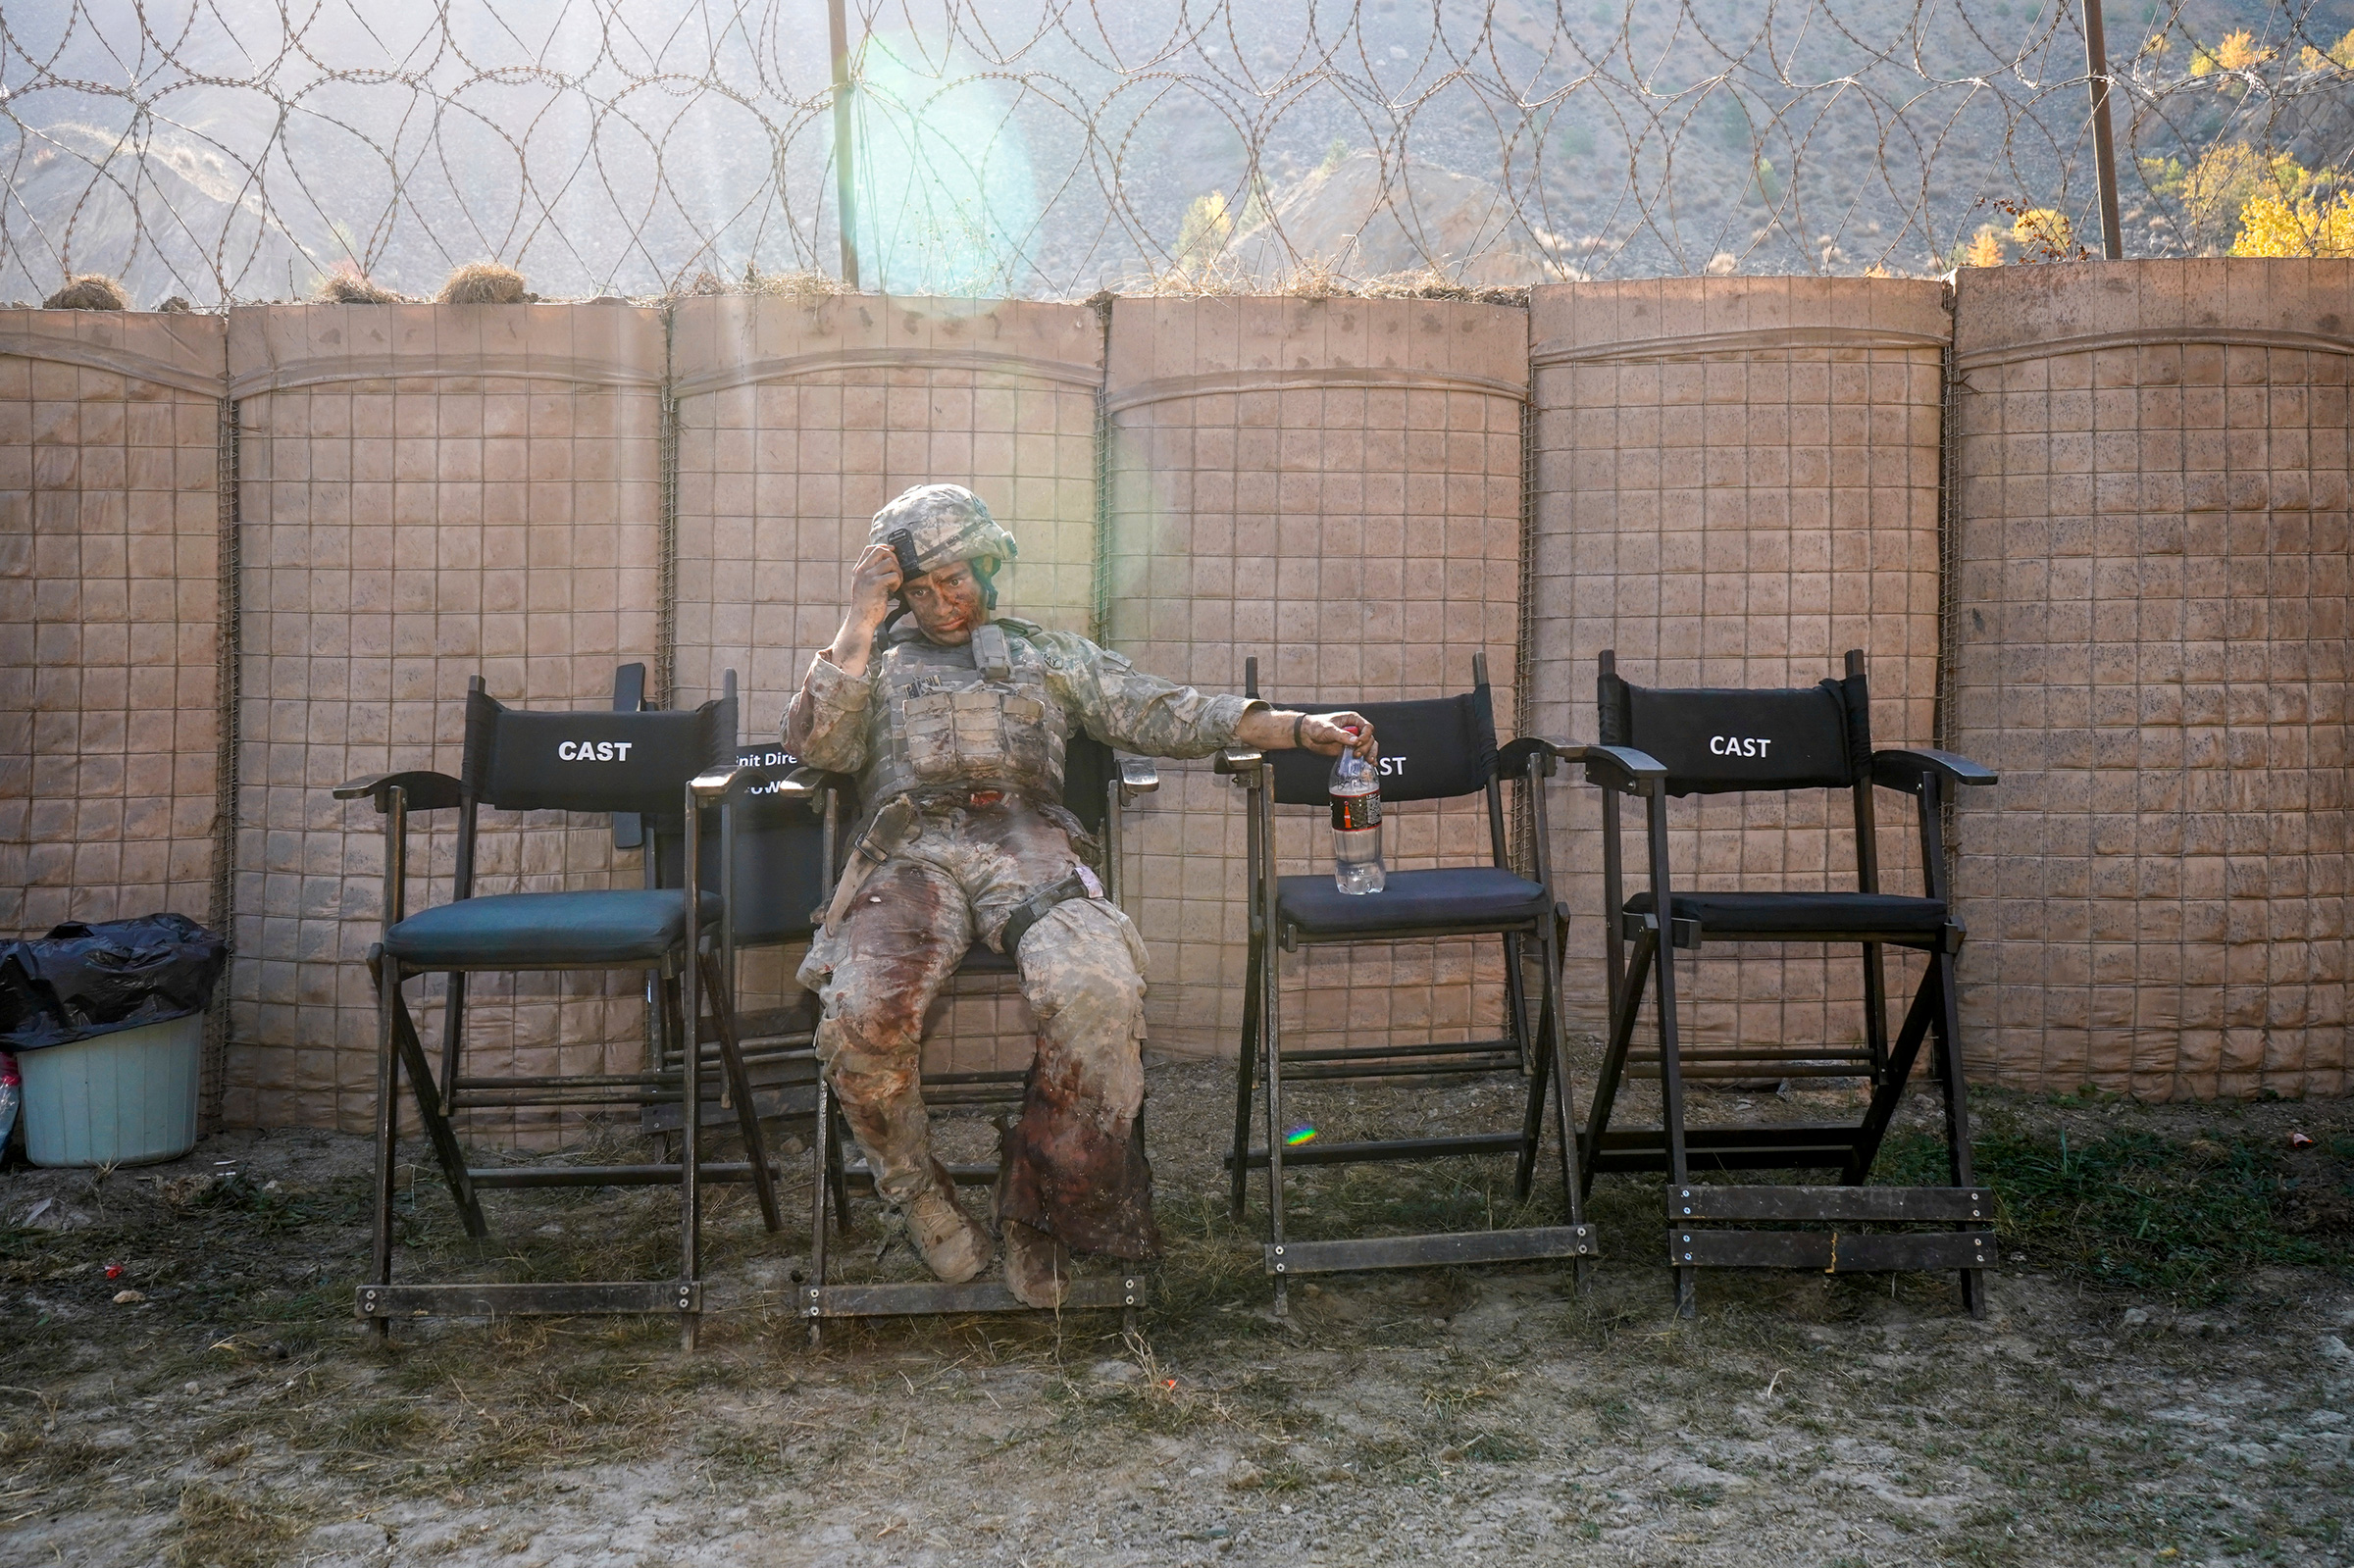 On the set of the film The Outpost, based on the Battle of Kamdesh in eastern Afghanistan. Eight American soldiers died in the battle, and it’s estimated that hundreds of insurgents were killed. Sofia, Bulgaria, 2018. (Peter van Agtmael—Magnum Photos)